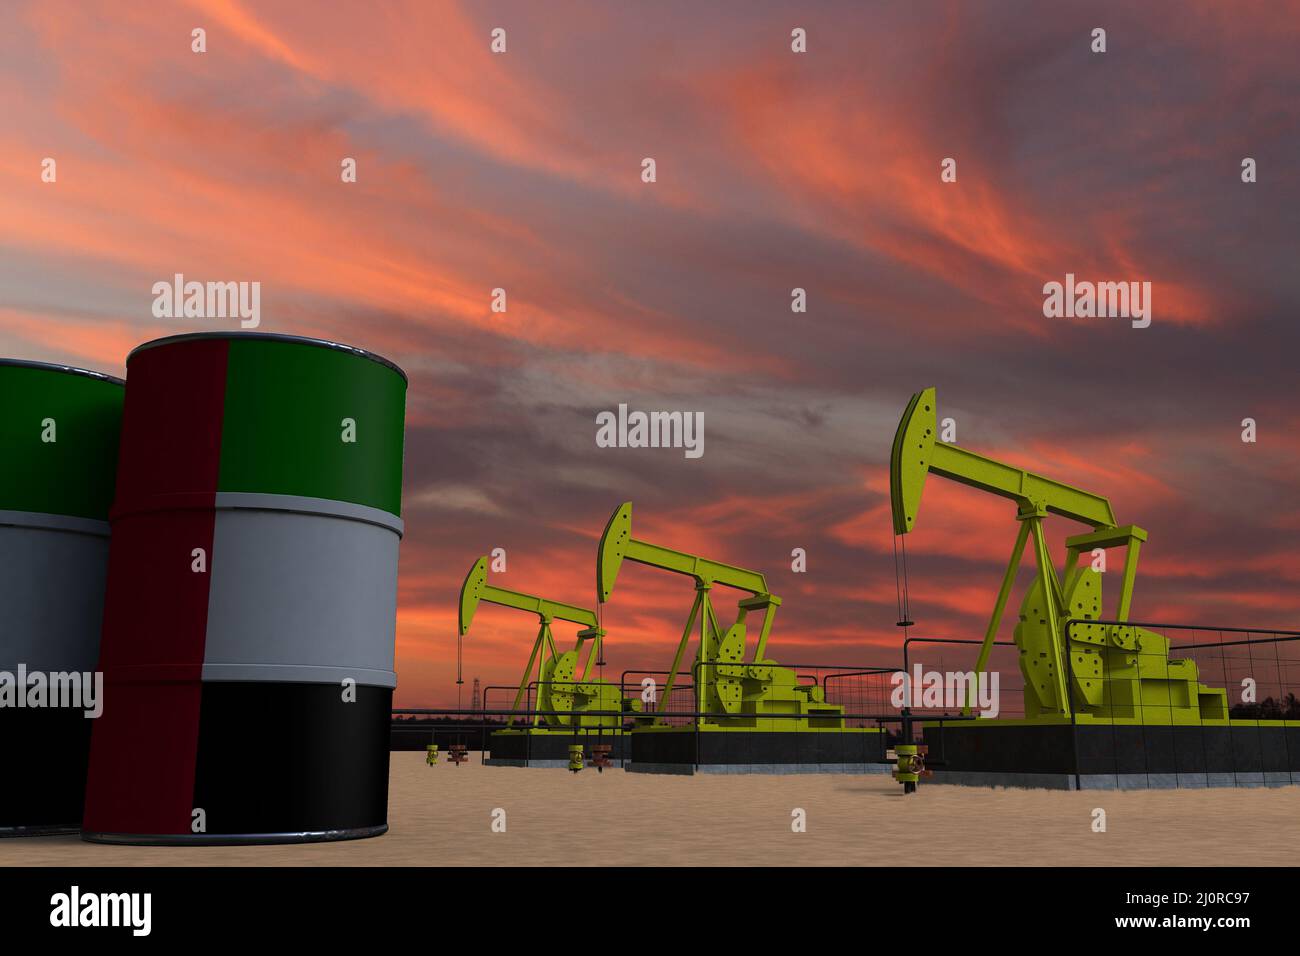 Nice pumpjack oil extraction and cloudy sky in sunset with the The United Arab Emirates UAE flag on oil barrels 3D rendering Stock Photo